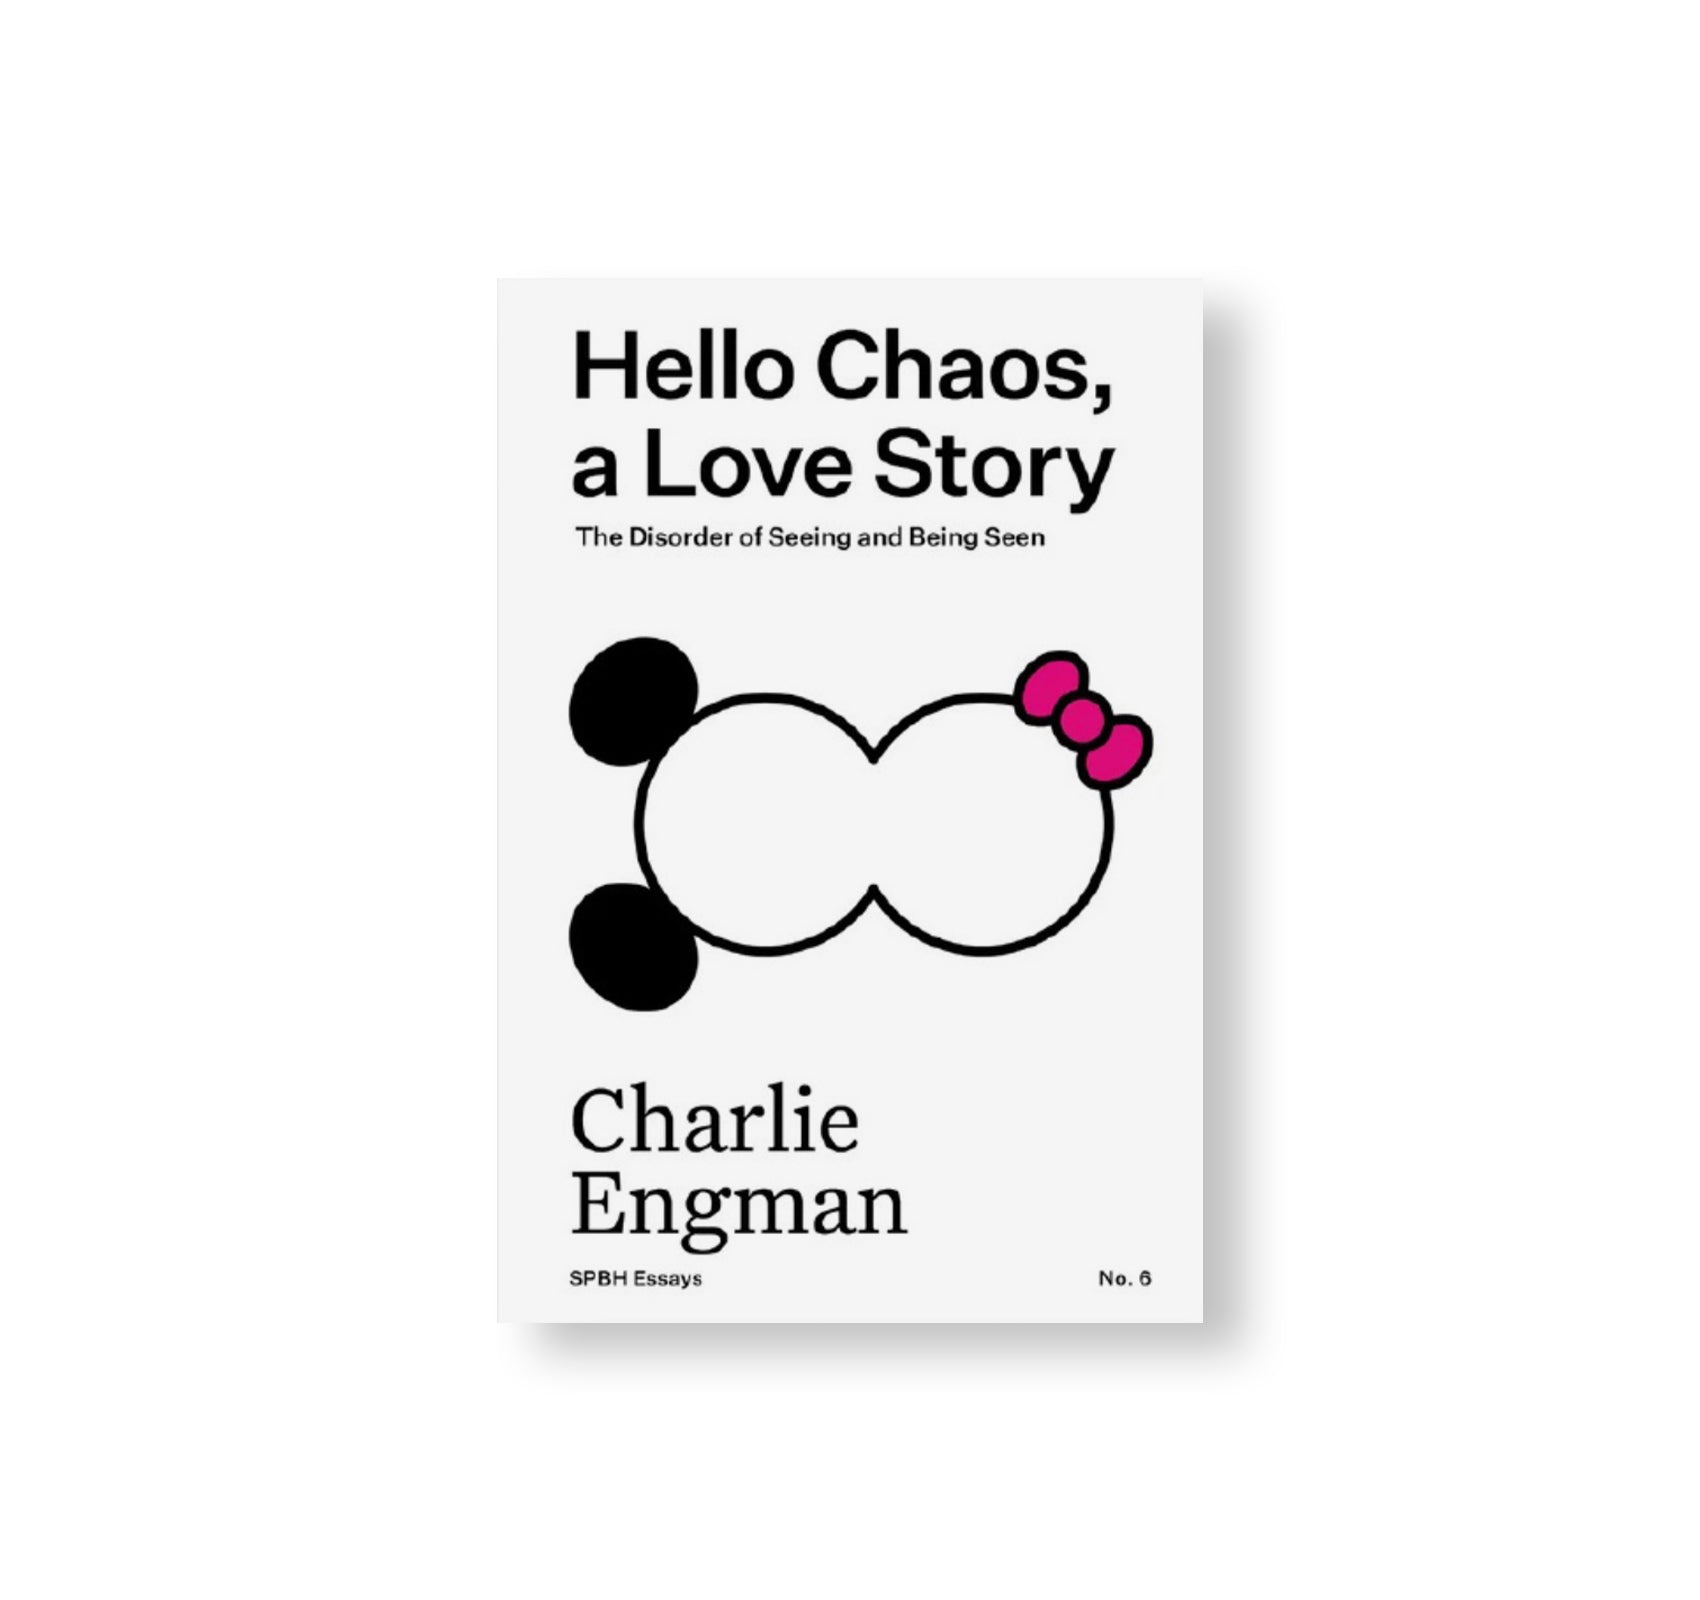 HELLO CHAOS, A LOVE STORY: THE DISORDER OF SEEING AND BEING SEEN by Charlie Engman